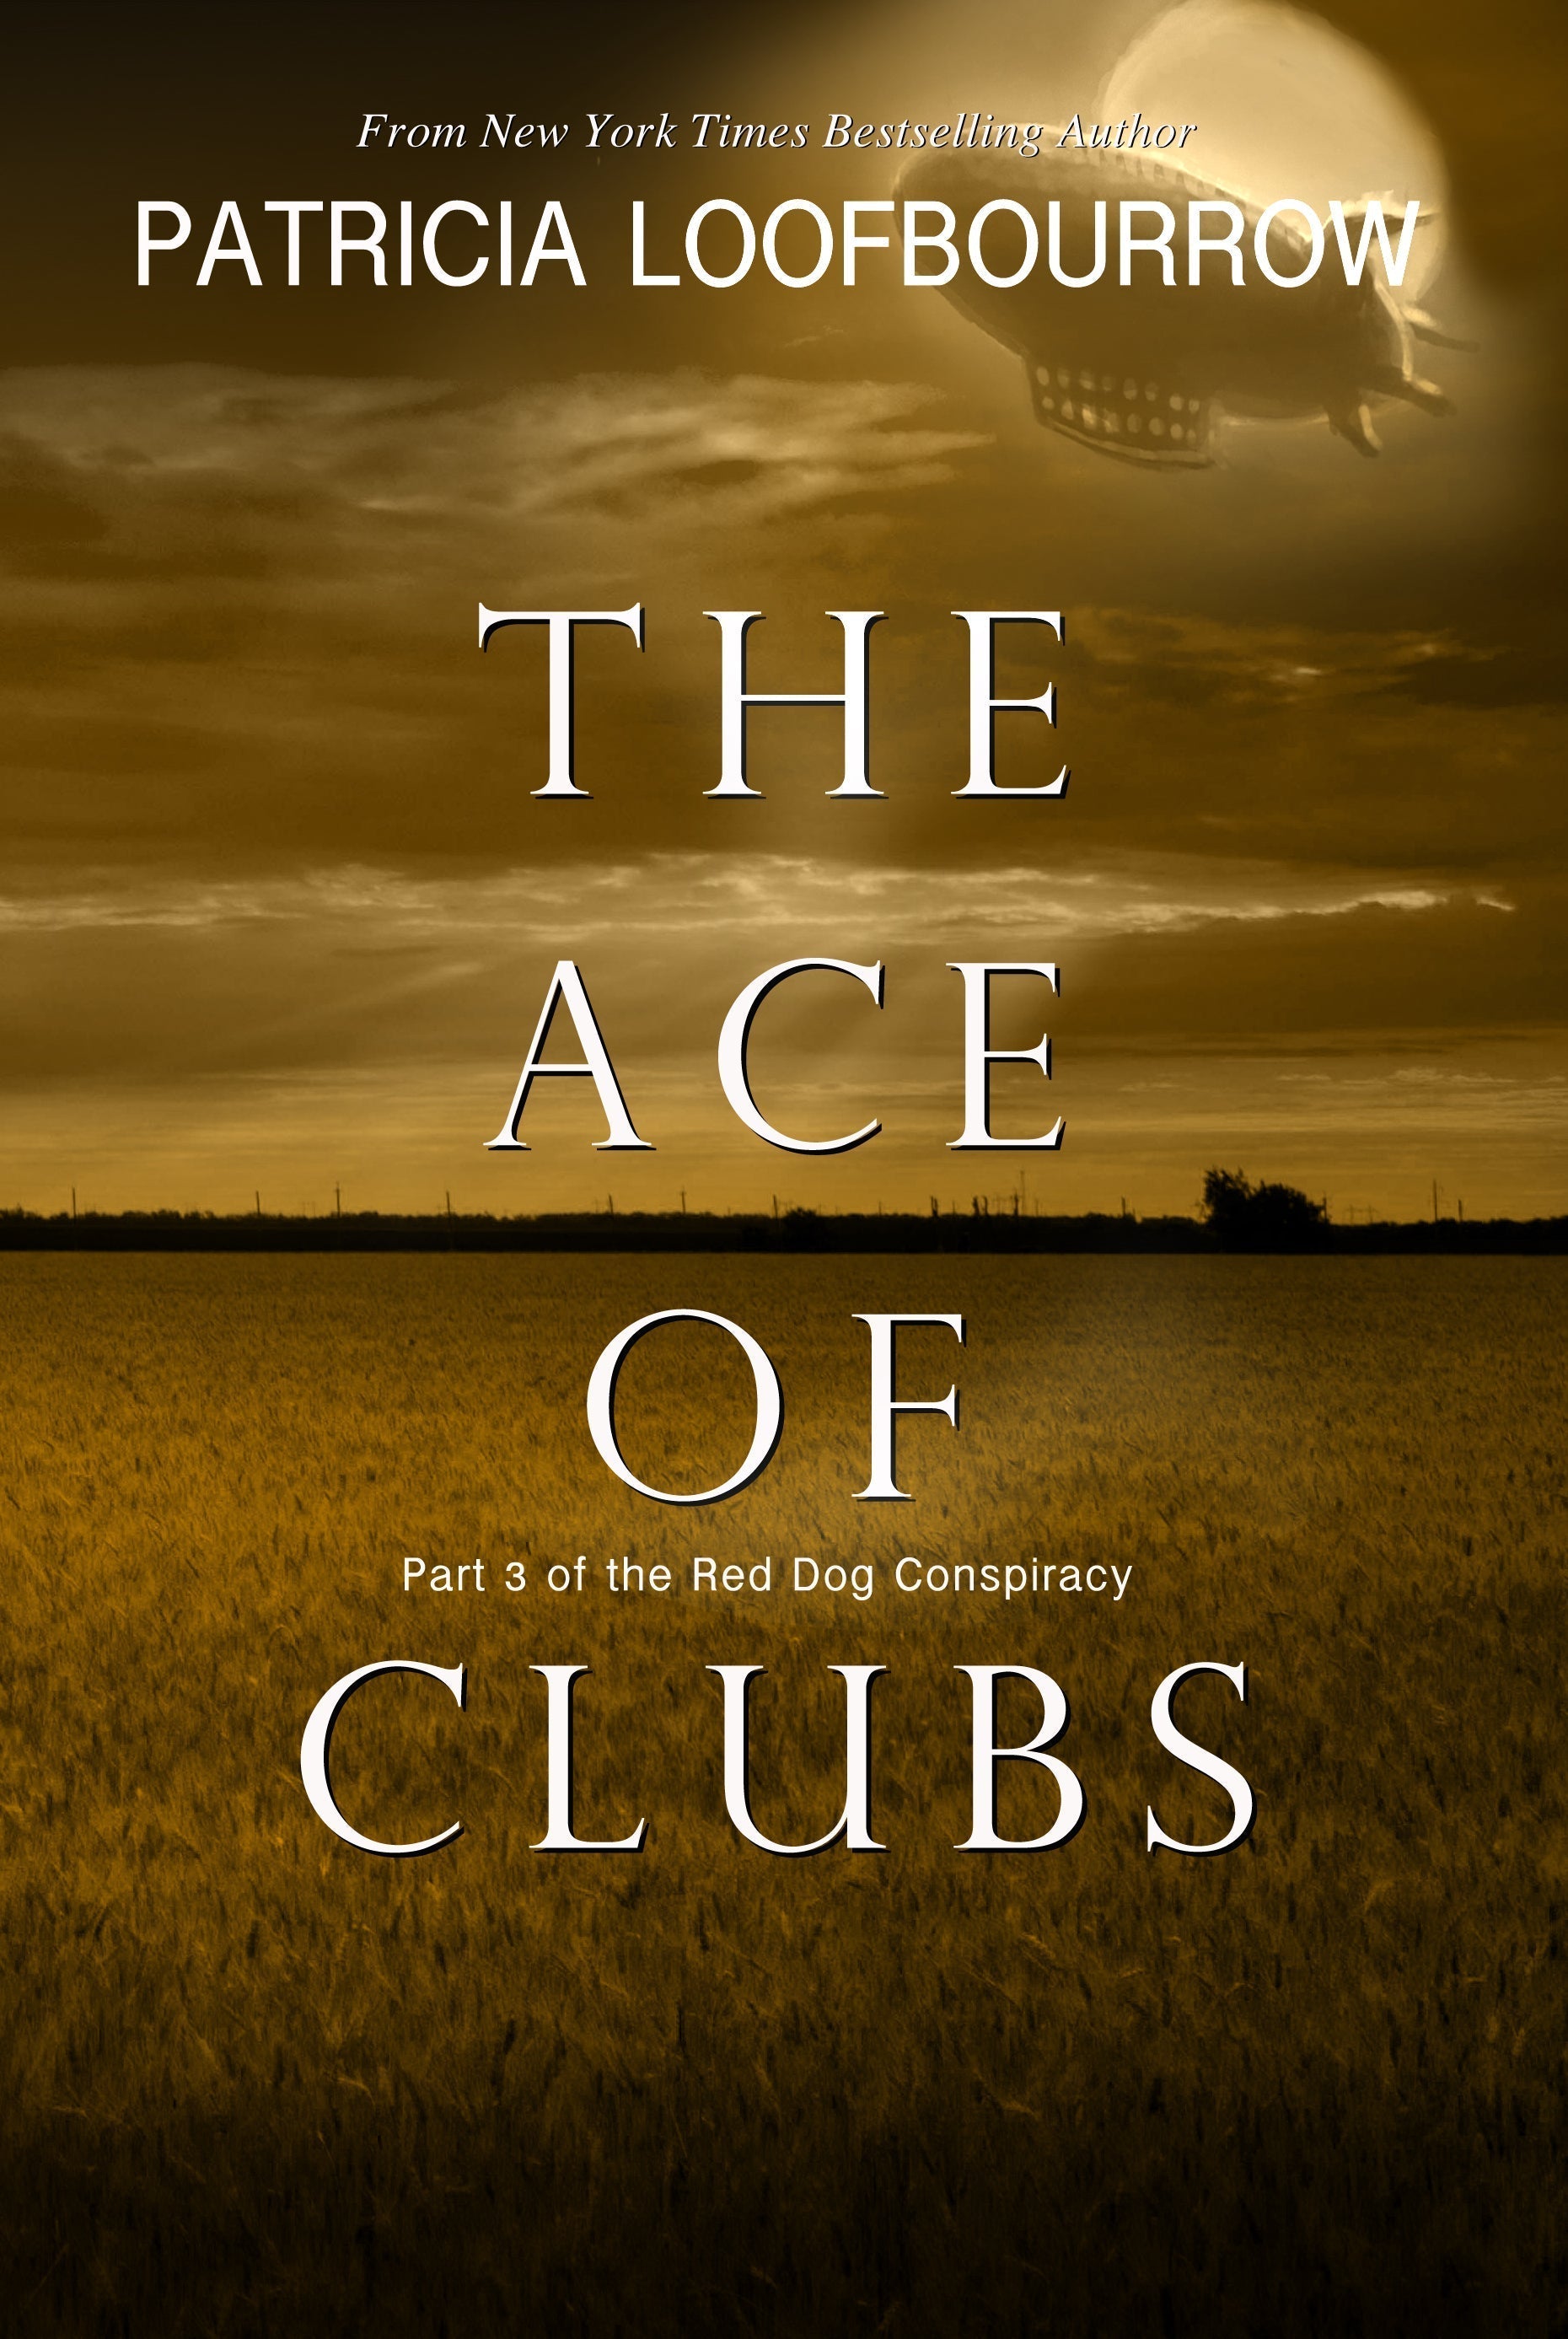 The Ace of Clubs [signed paperback] - PatriciaLoofbourrow